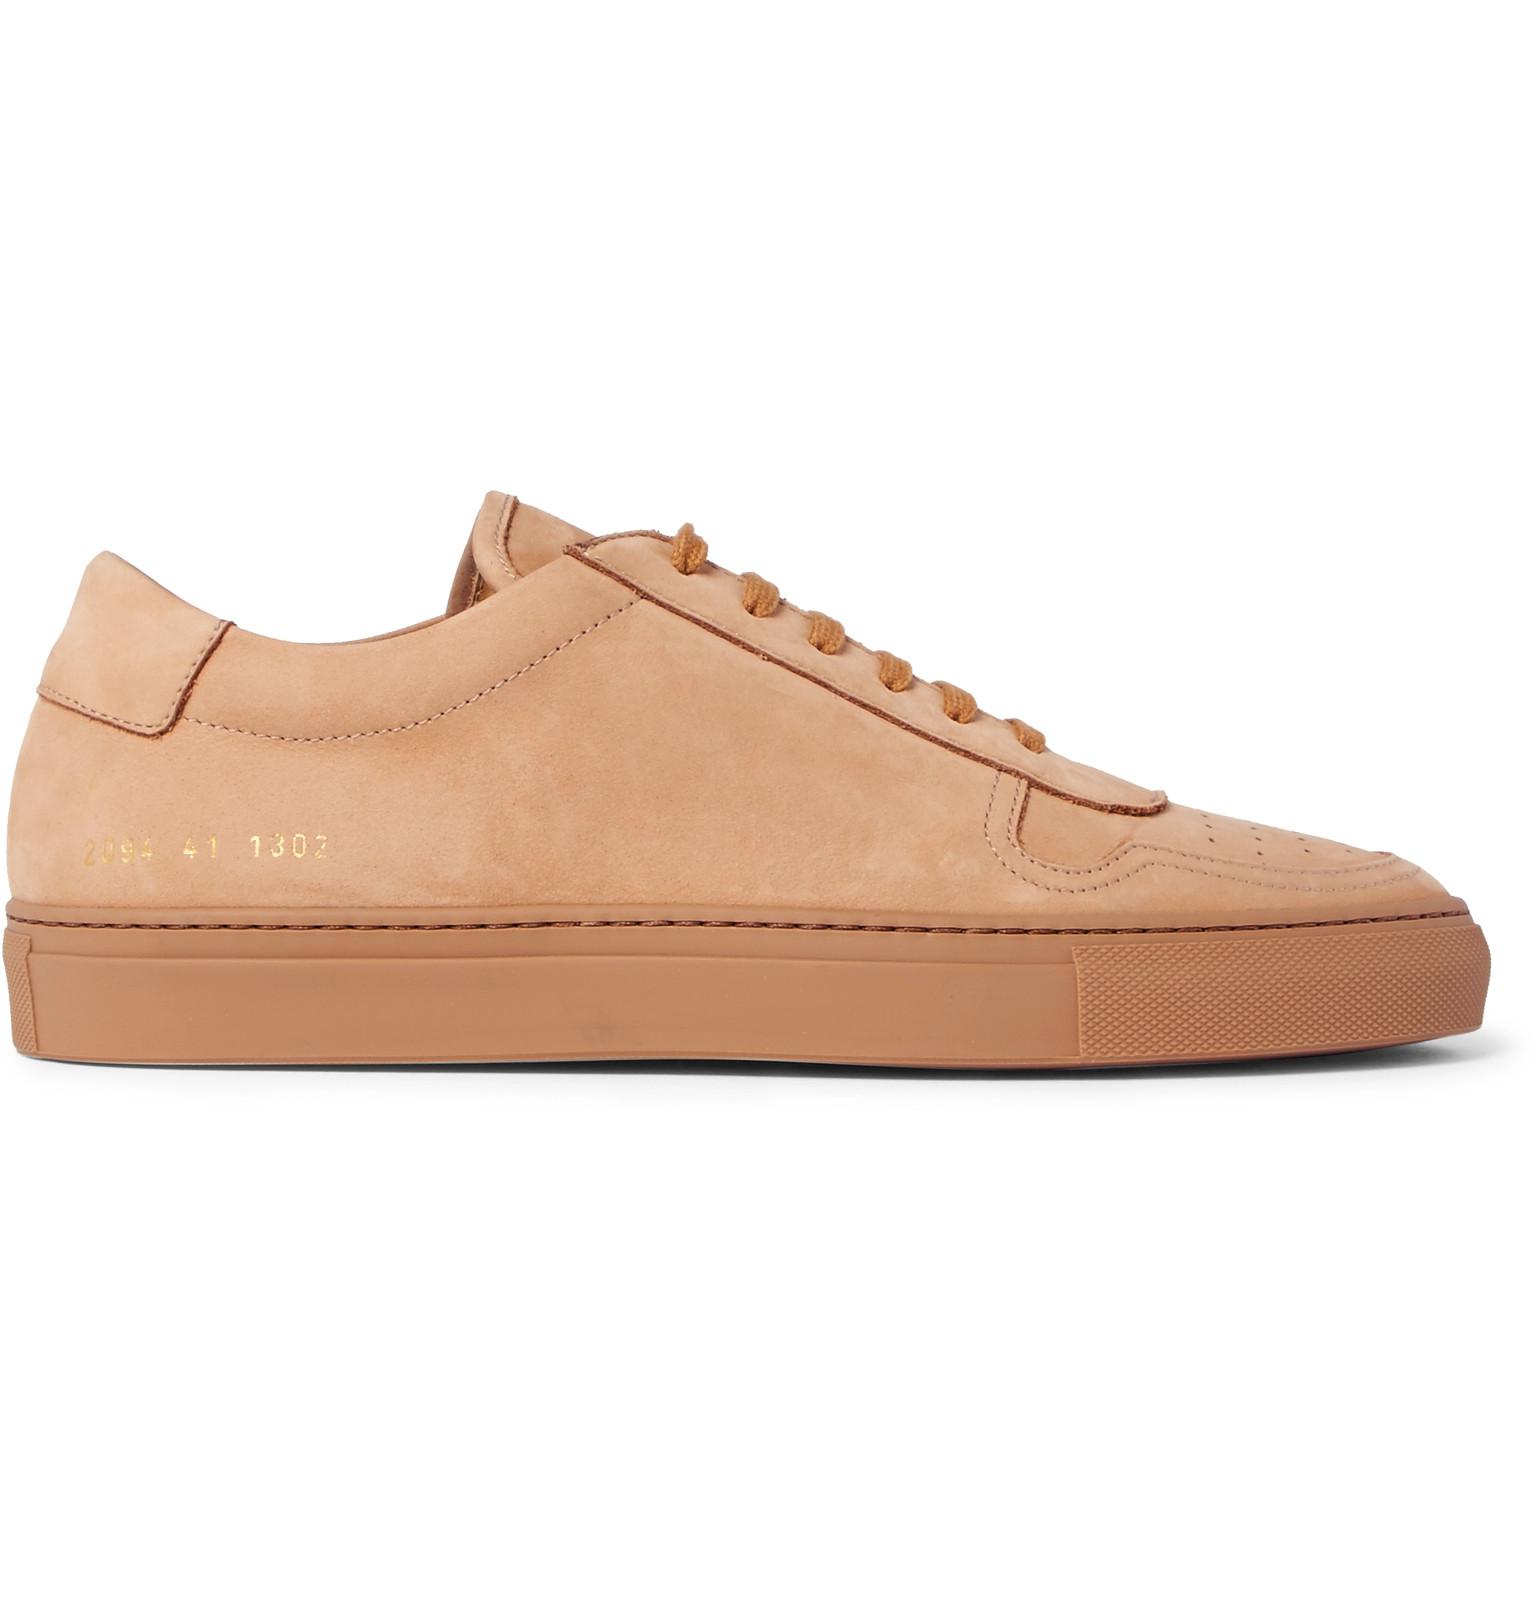 Common Projects Leather Bball Nubuck Sneakers for Men - Lyst